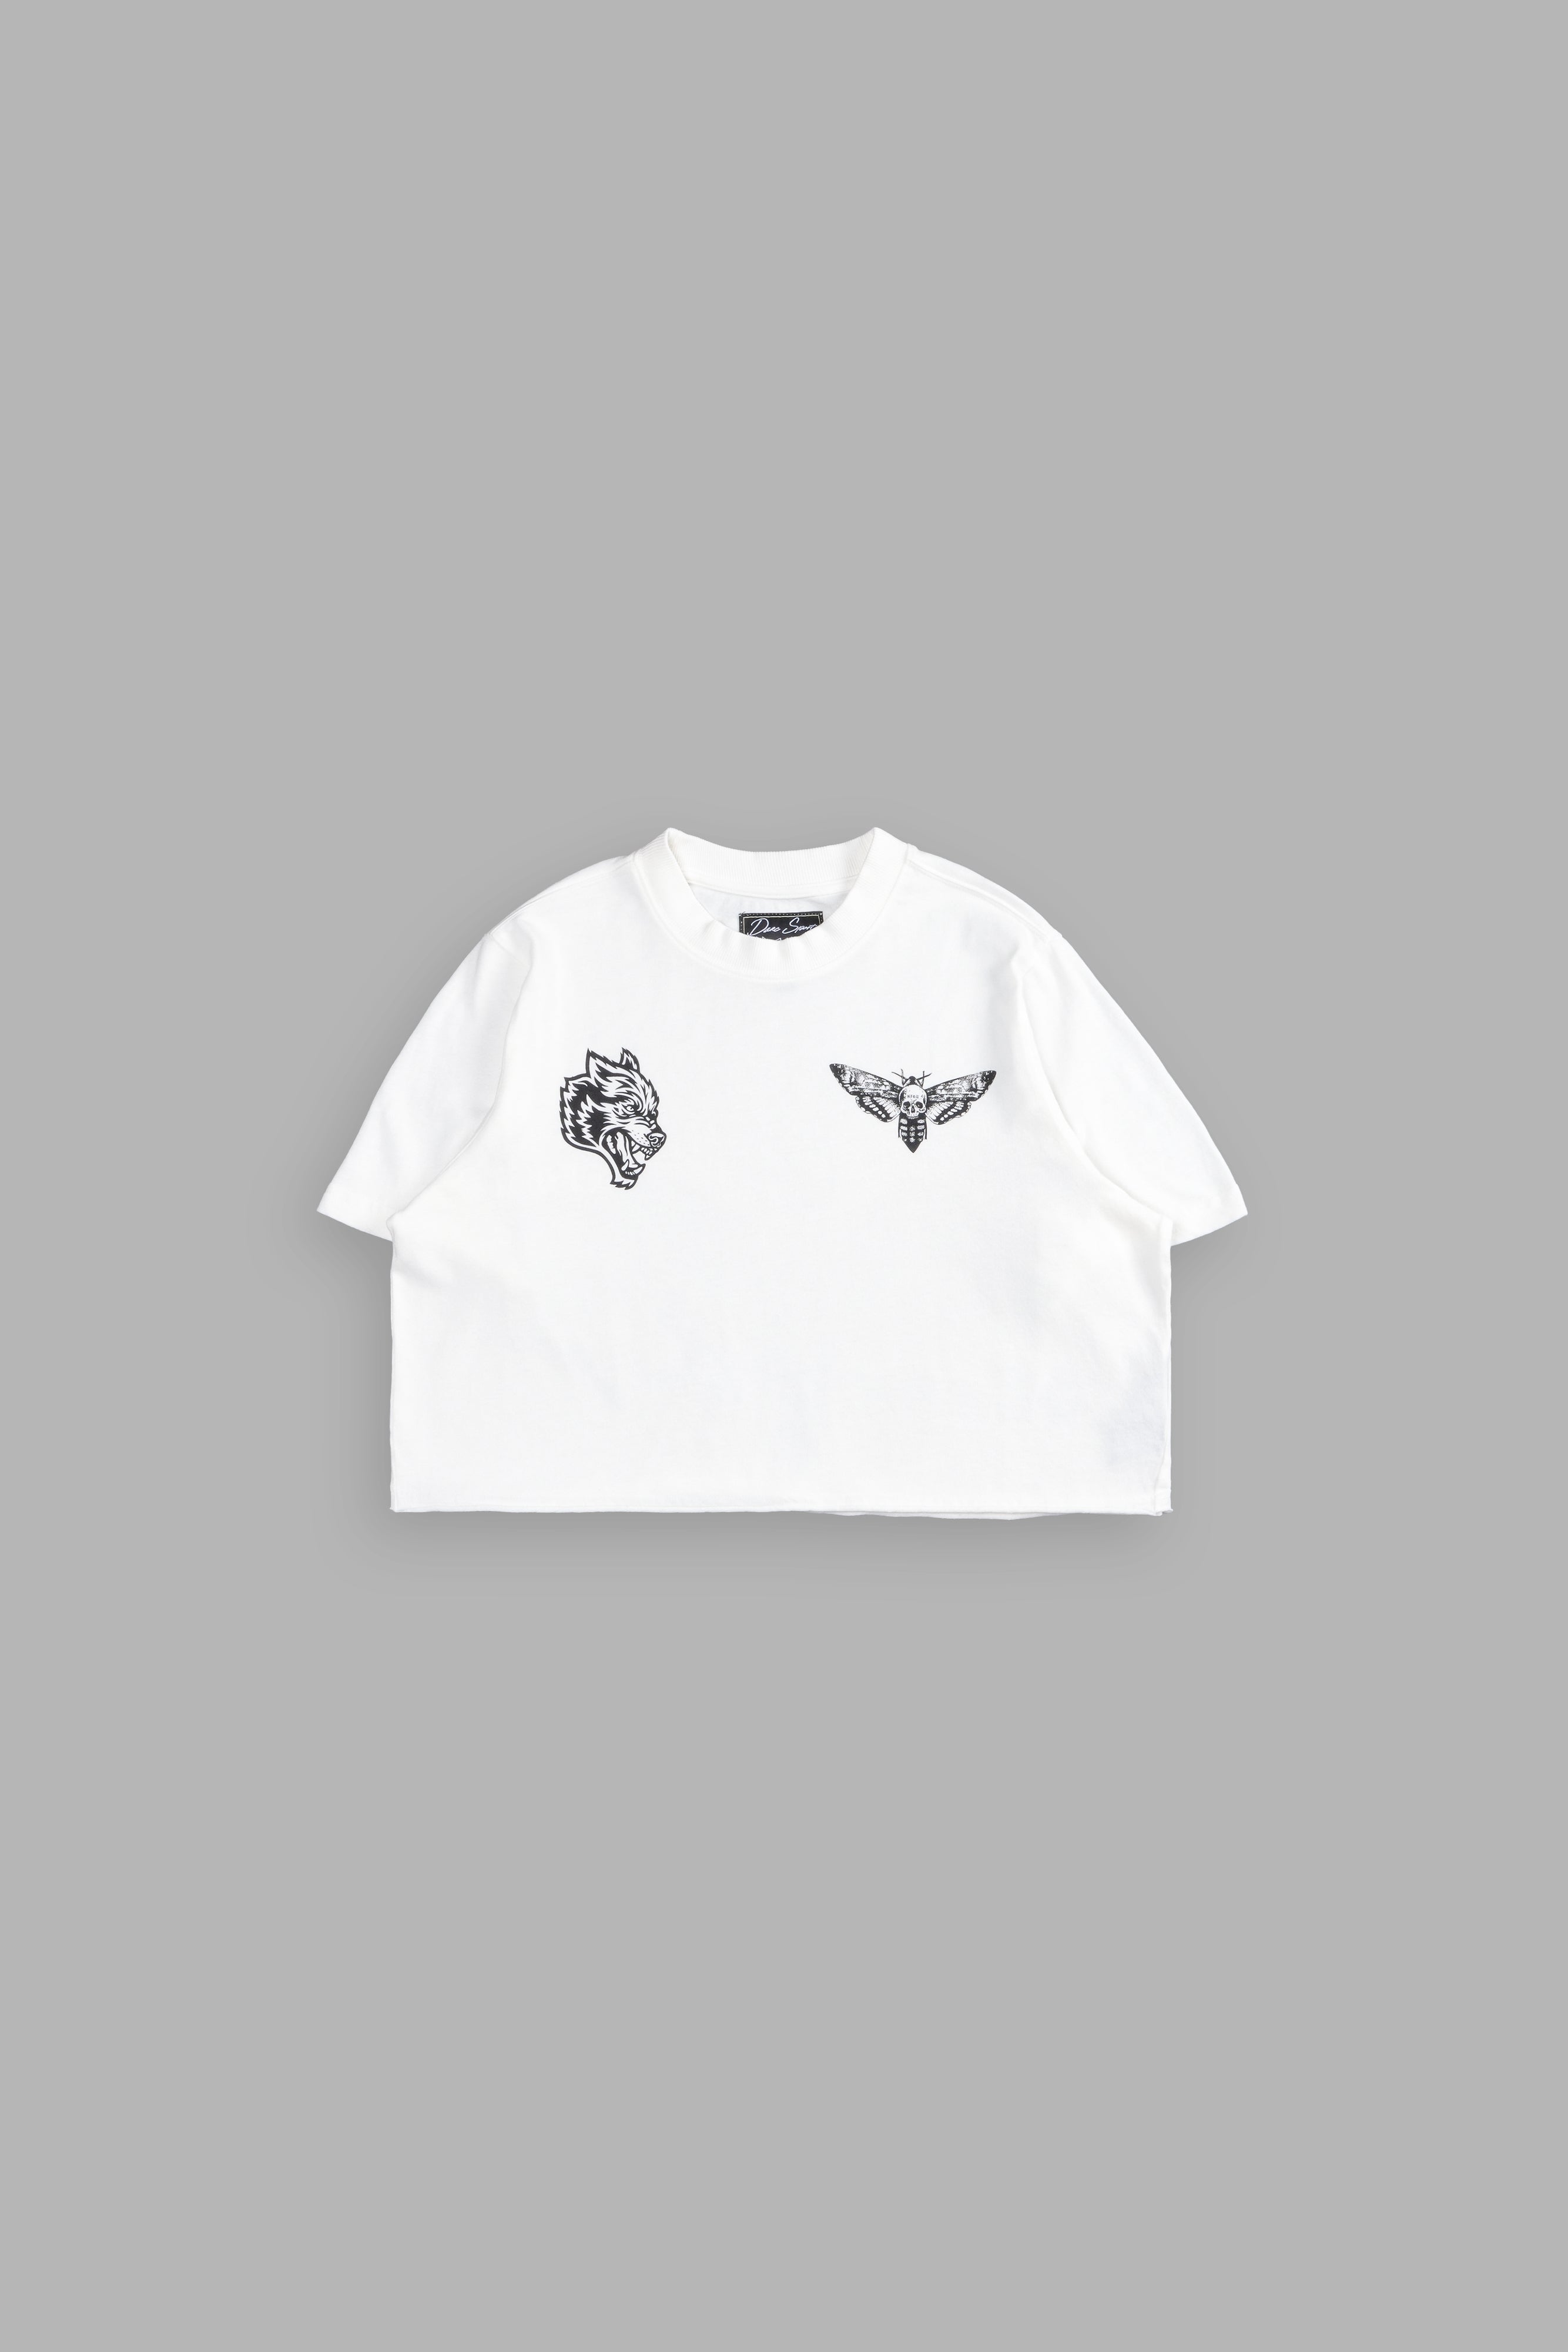 Life And Death "Premium Vintage" (Cropped) Tee in Cream